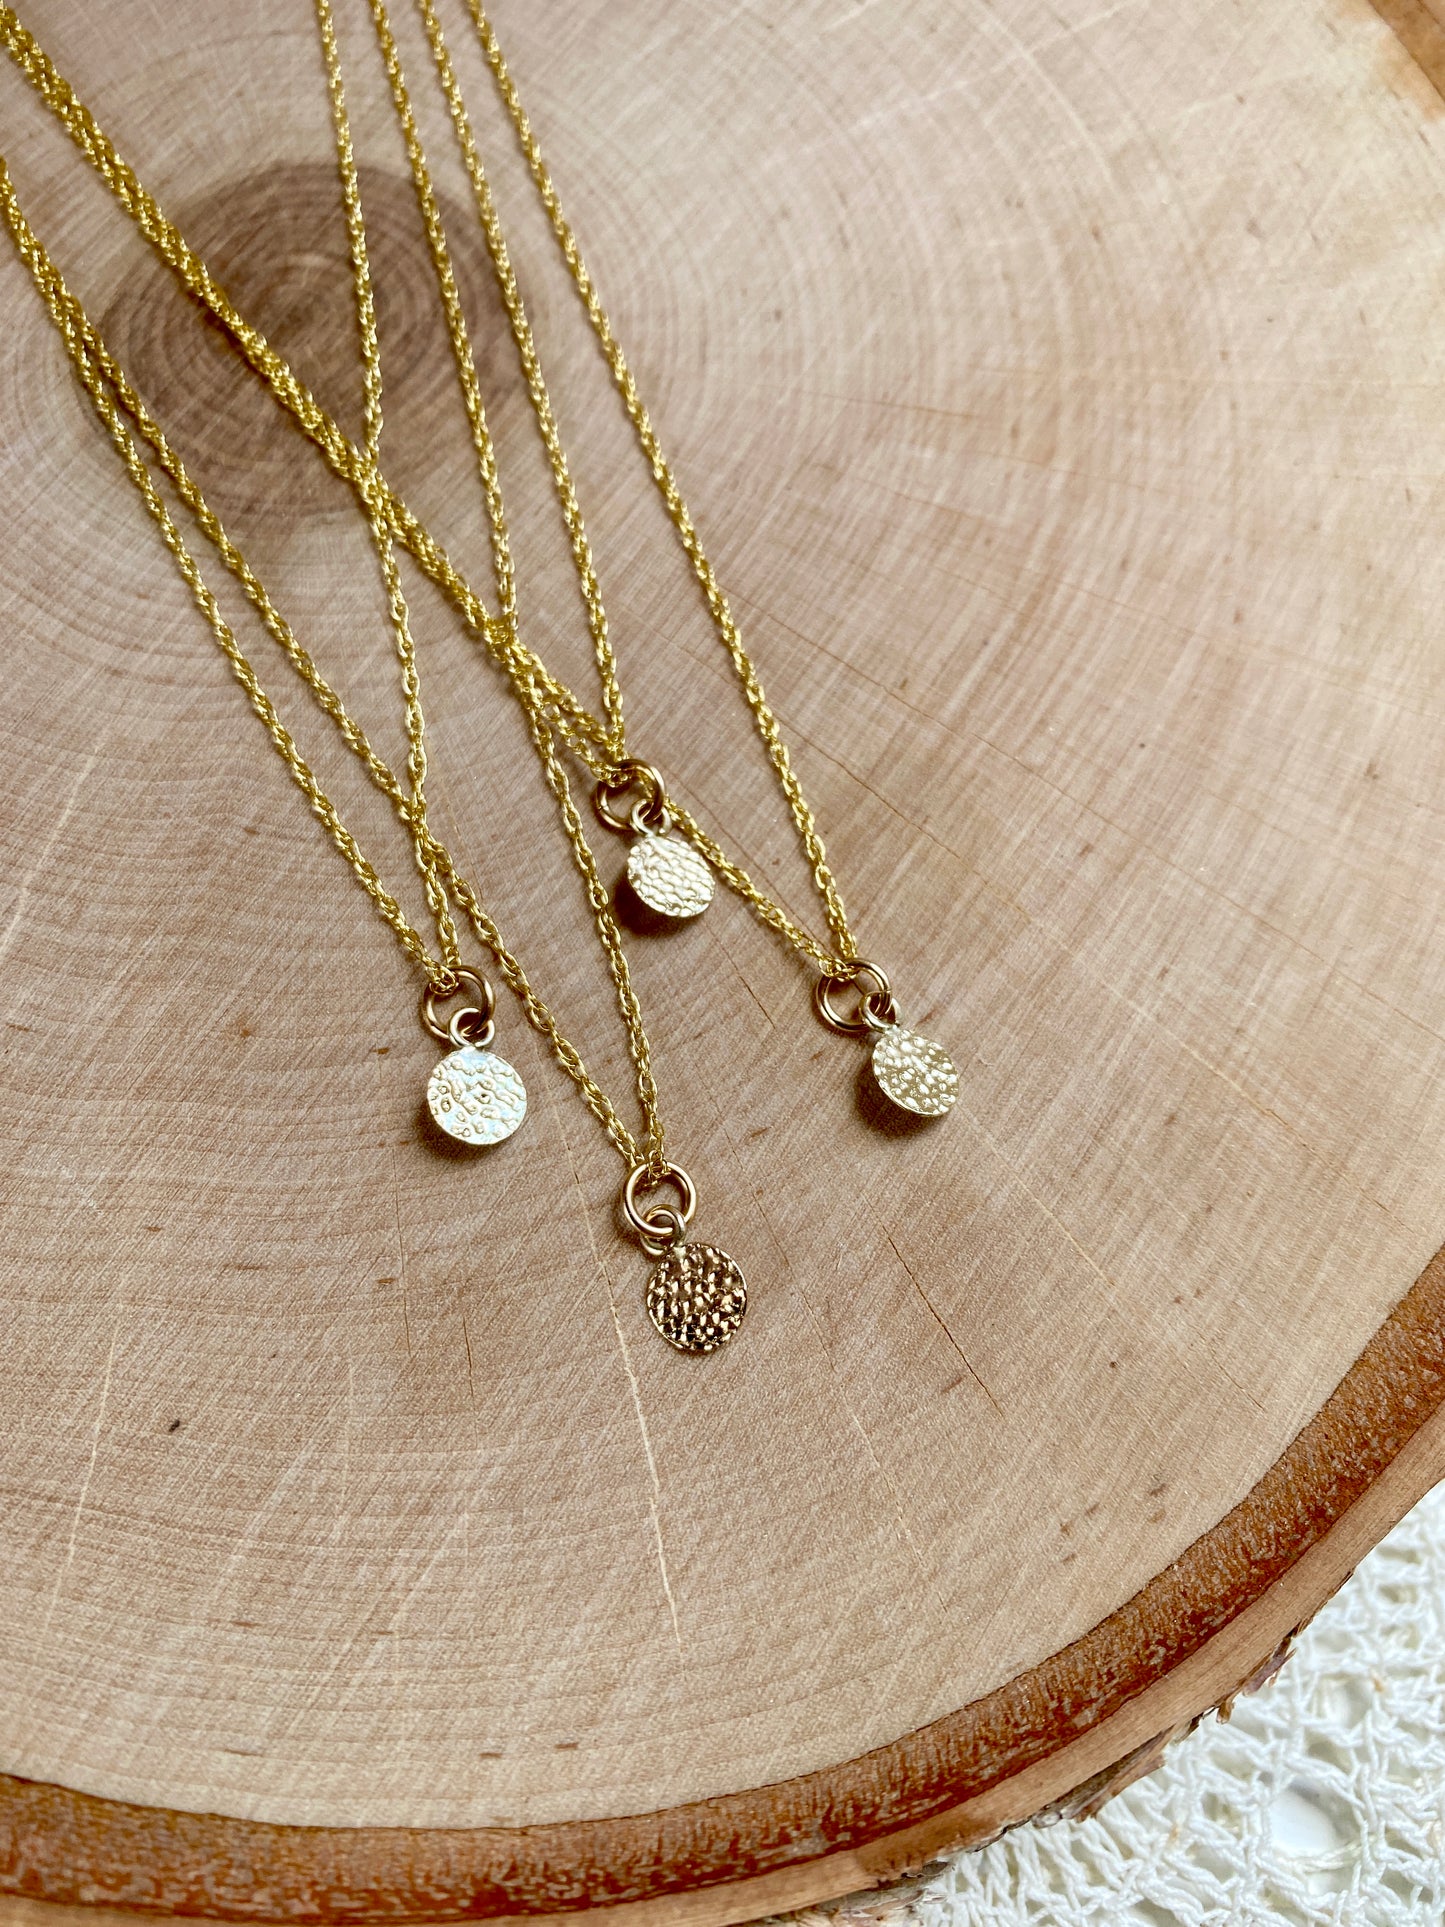 Into the Light ~ 14K Yellow Gold Fill Hammered Charm Necklace - Sacred Symbols Series